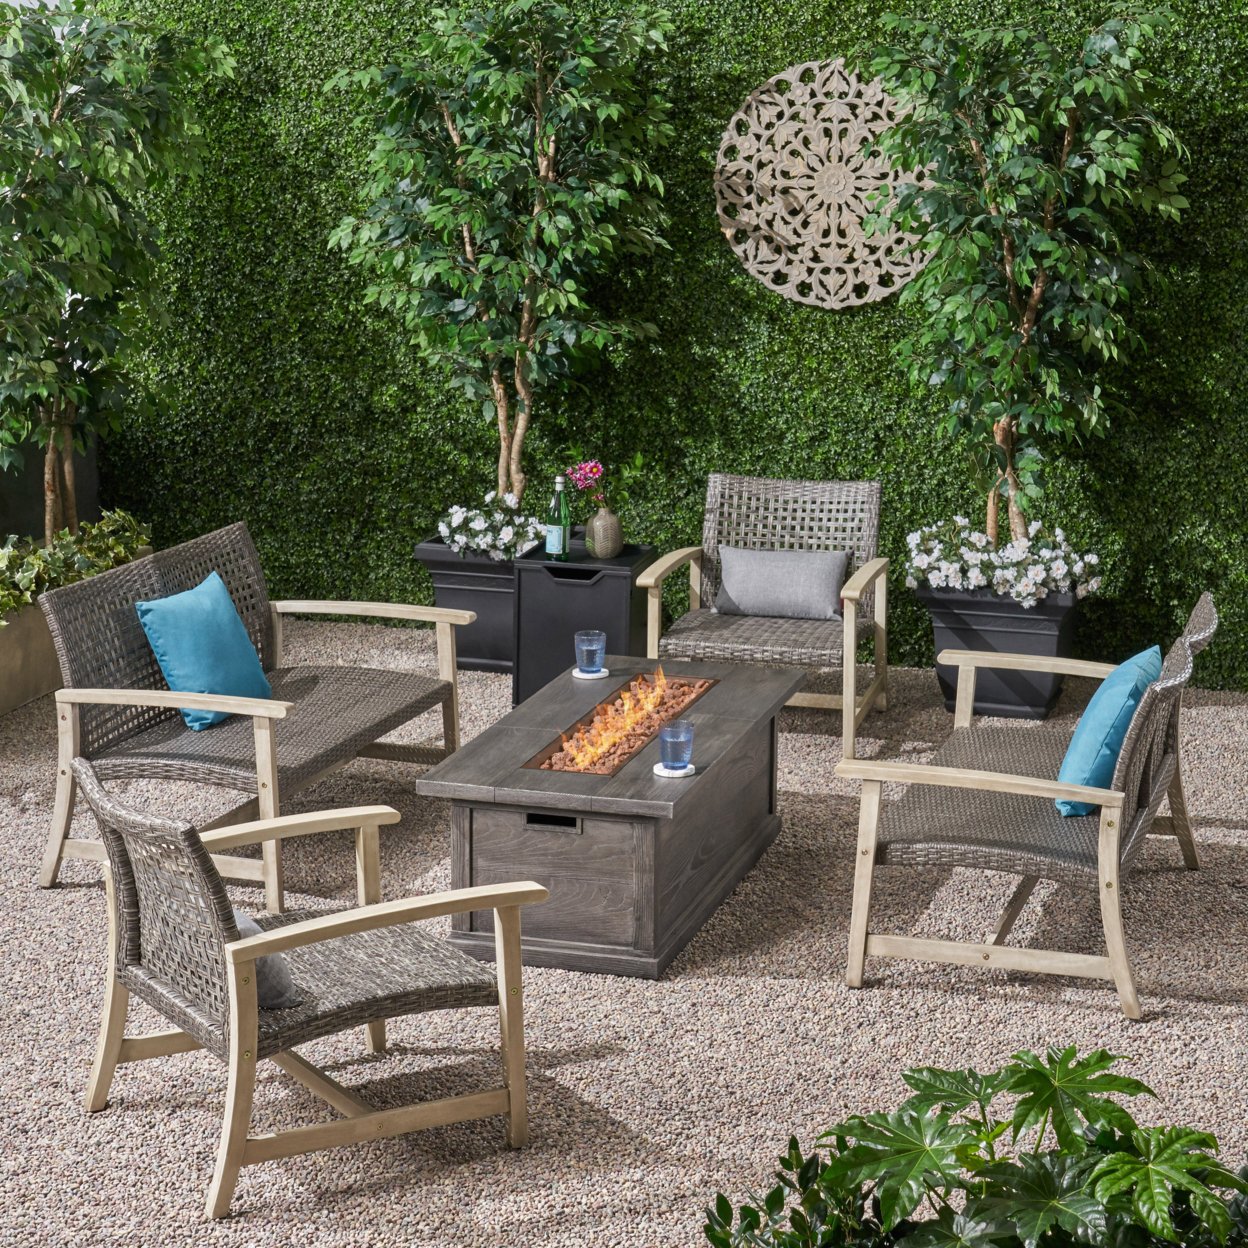 Rachel Outdoor 6 Piece Wood And Wicker Chat Set With Fire Pit - Mixed Black + Light Gray Washed Finish + Gray